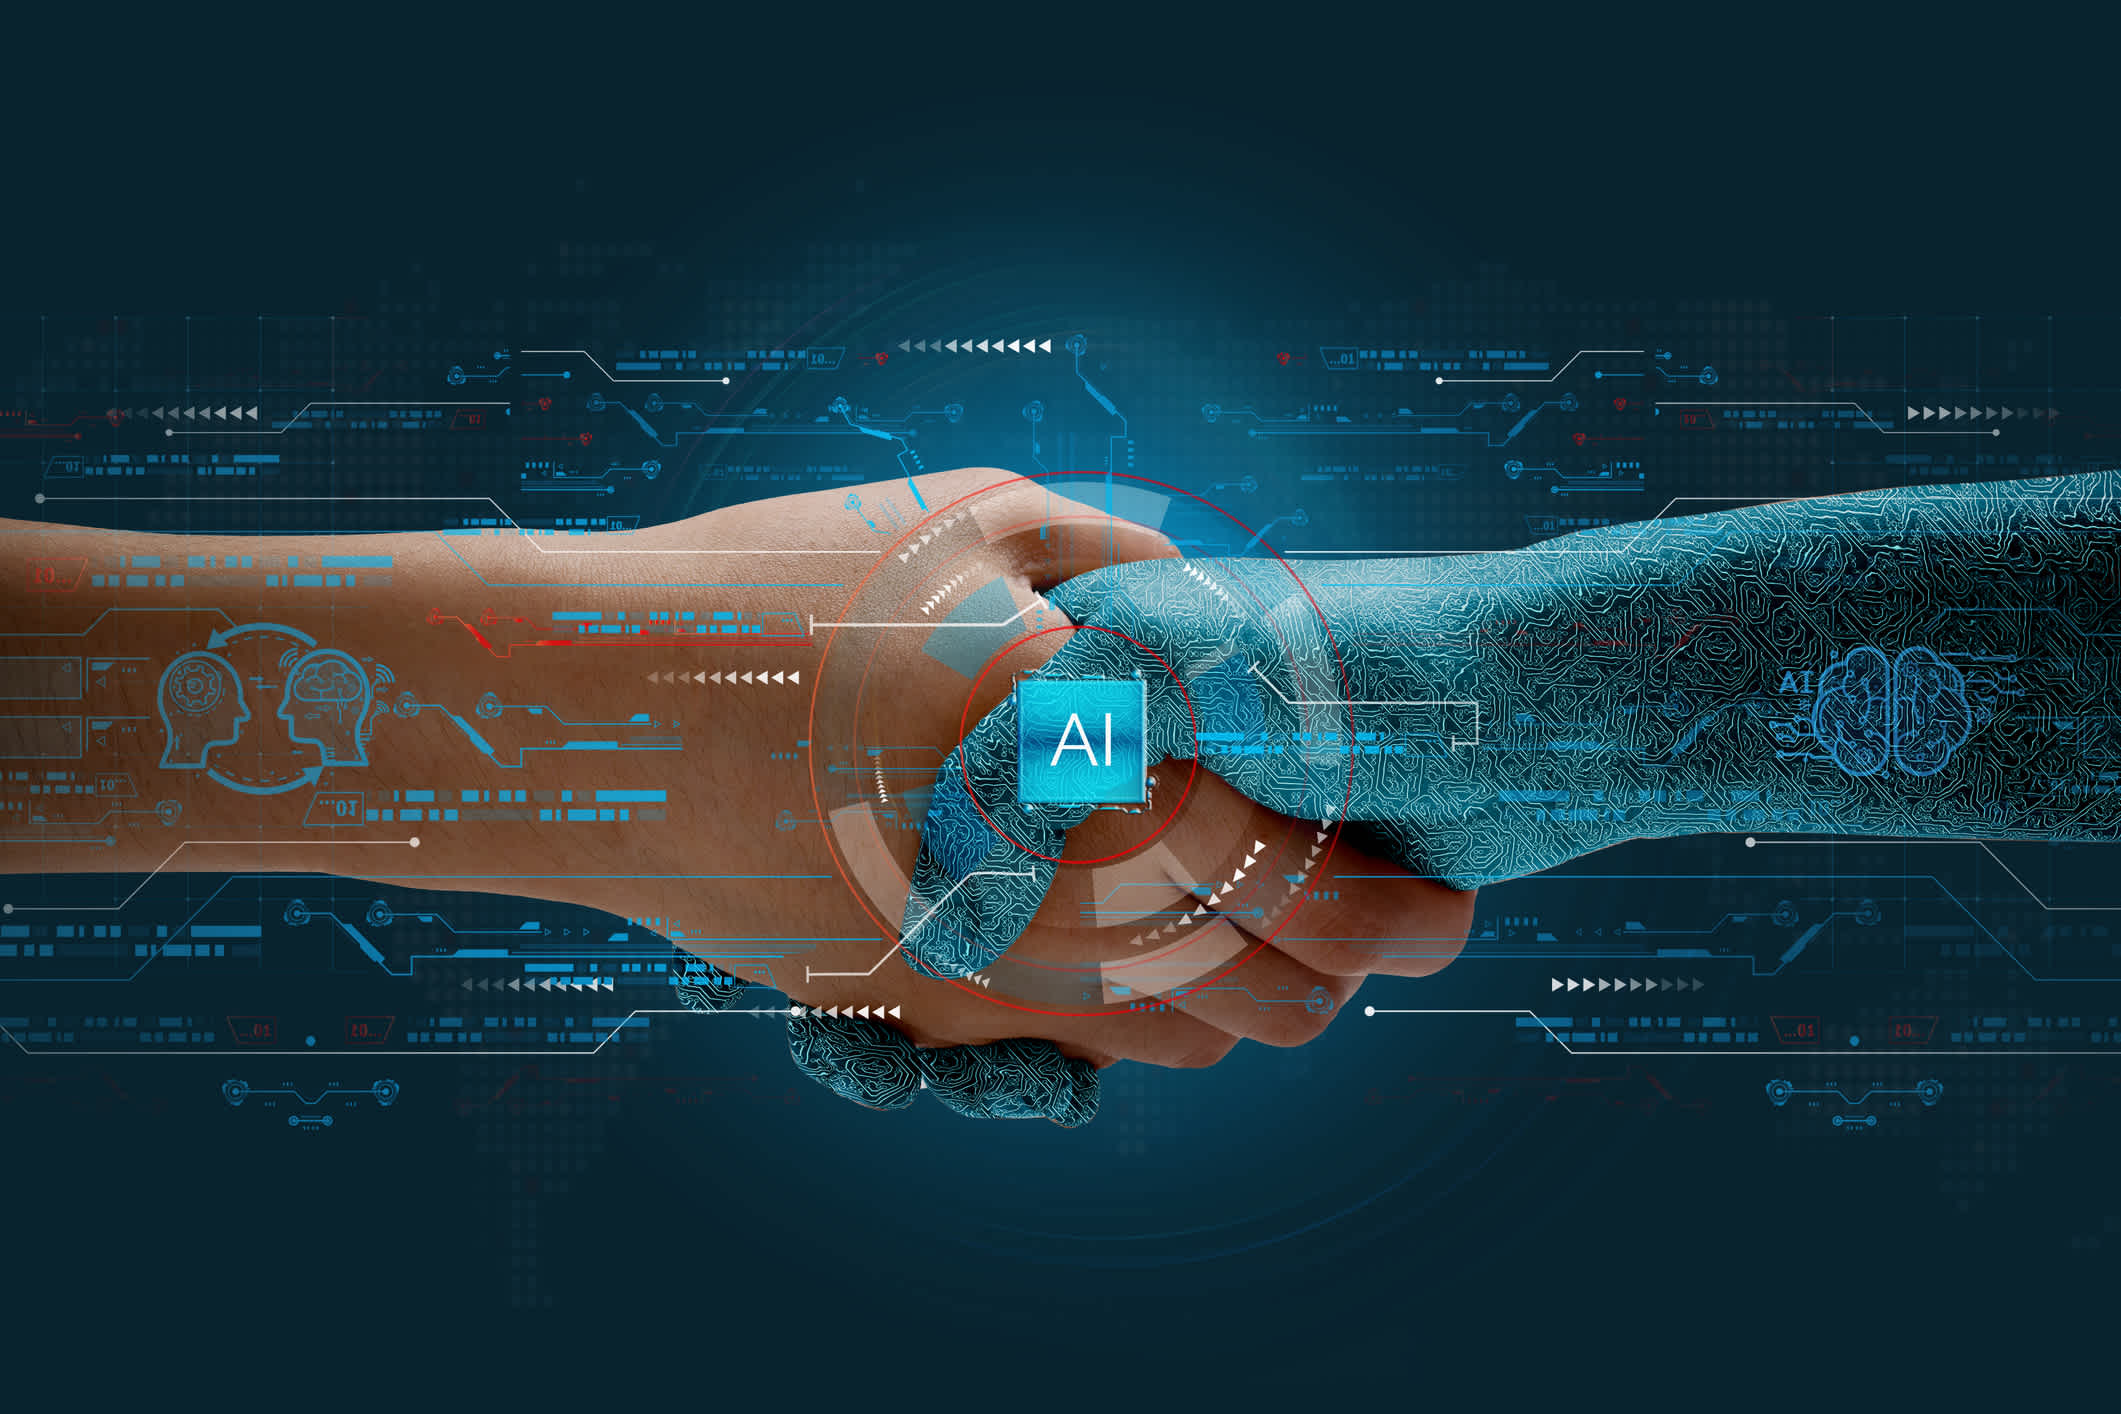 Humans shake hands with AI to show partnership. Machine learning enables and works together to achieve greater innovation and success. | Watermark